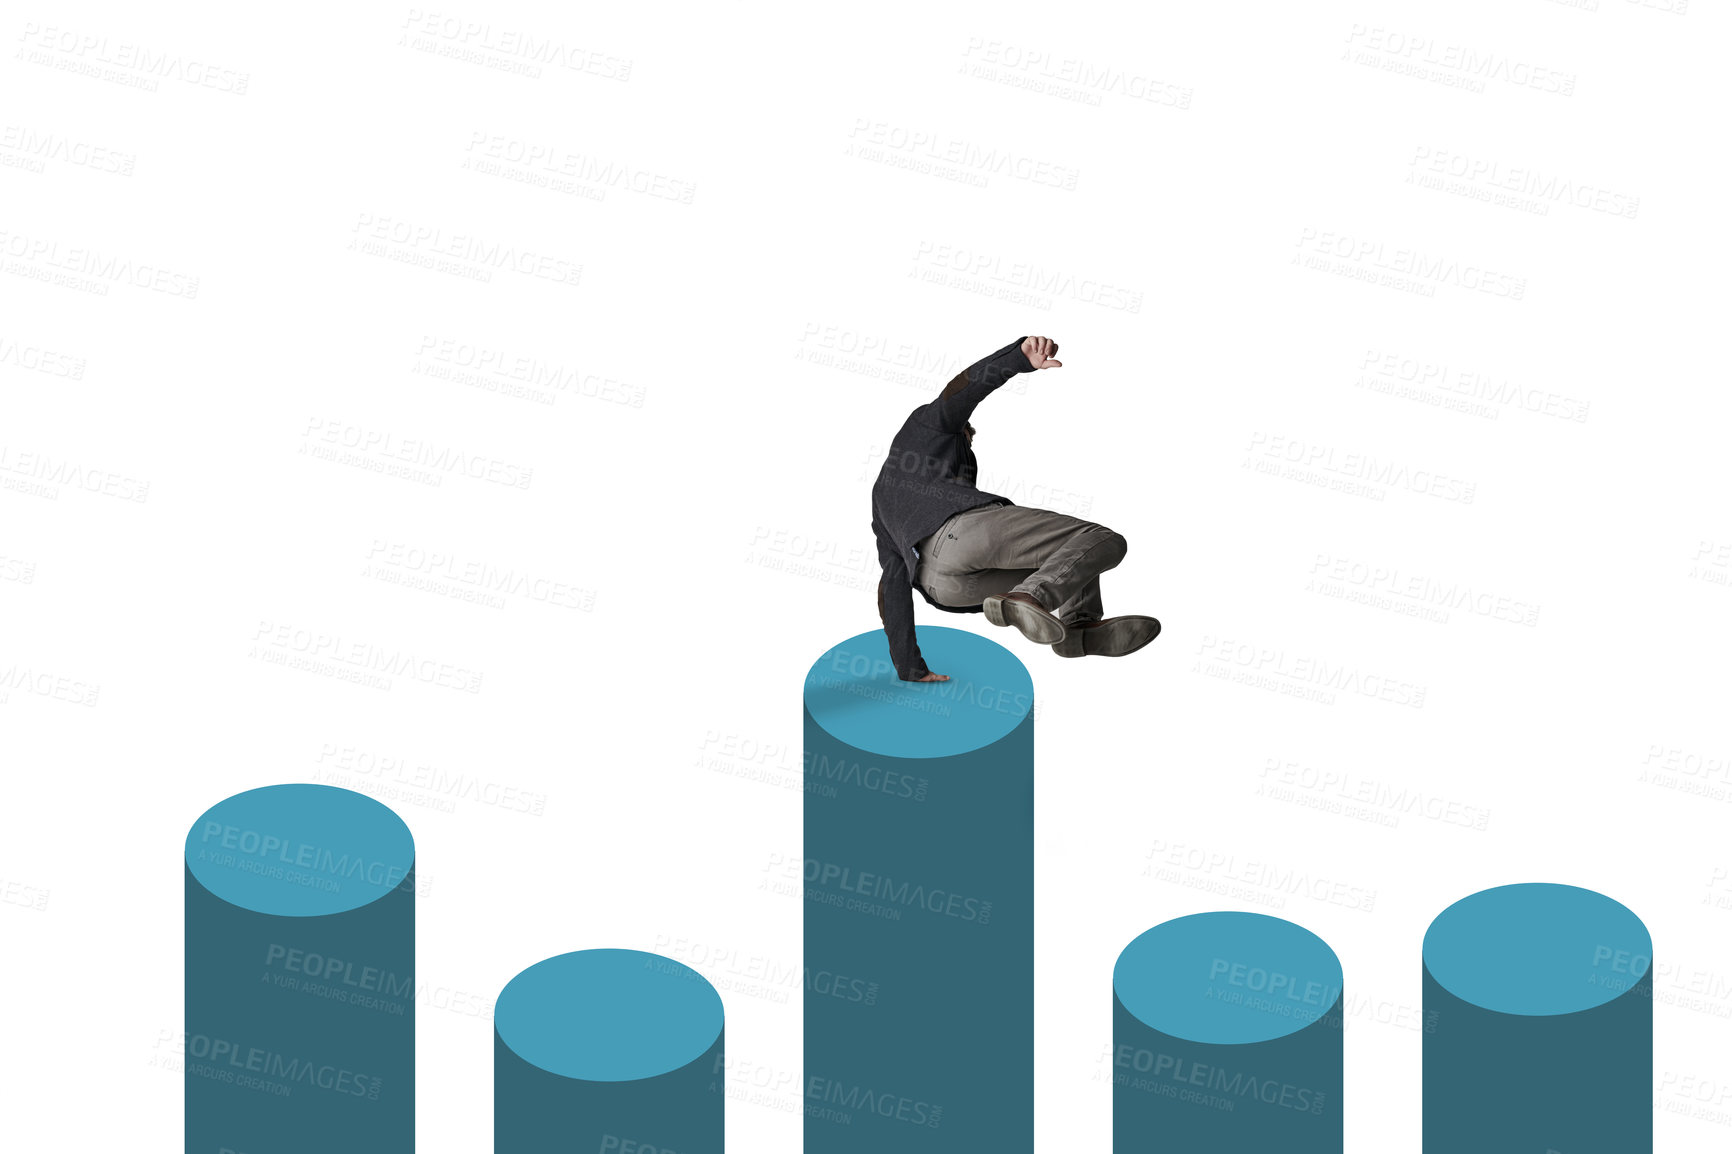 Buy stock photo Shot of a businessman jumping over a graph against a white background